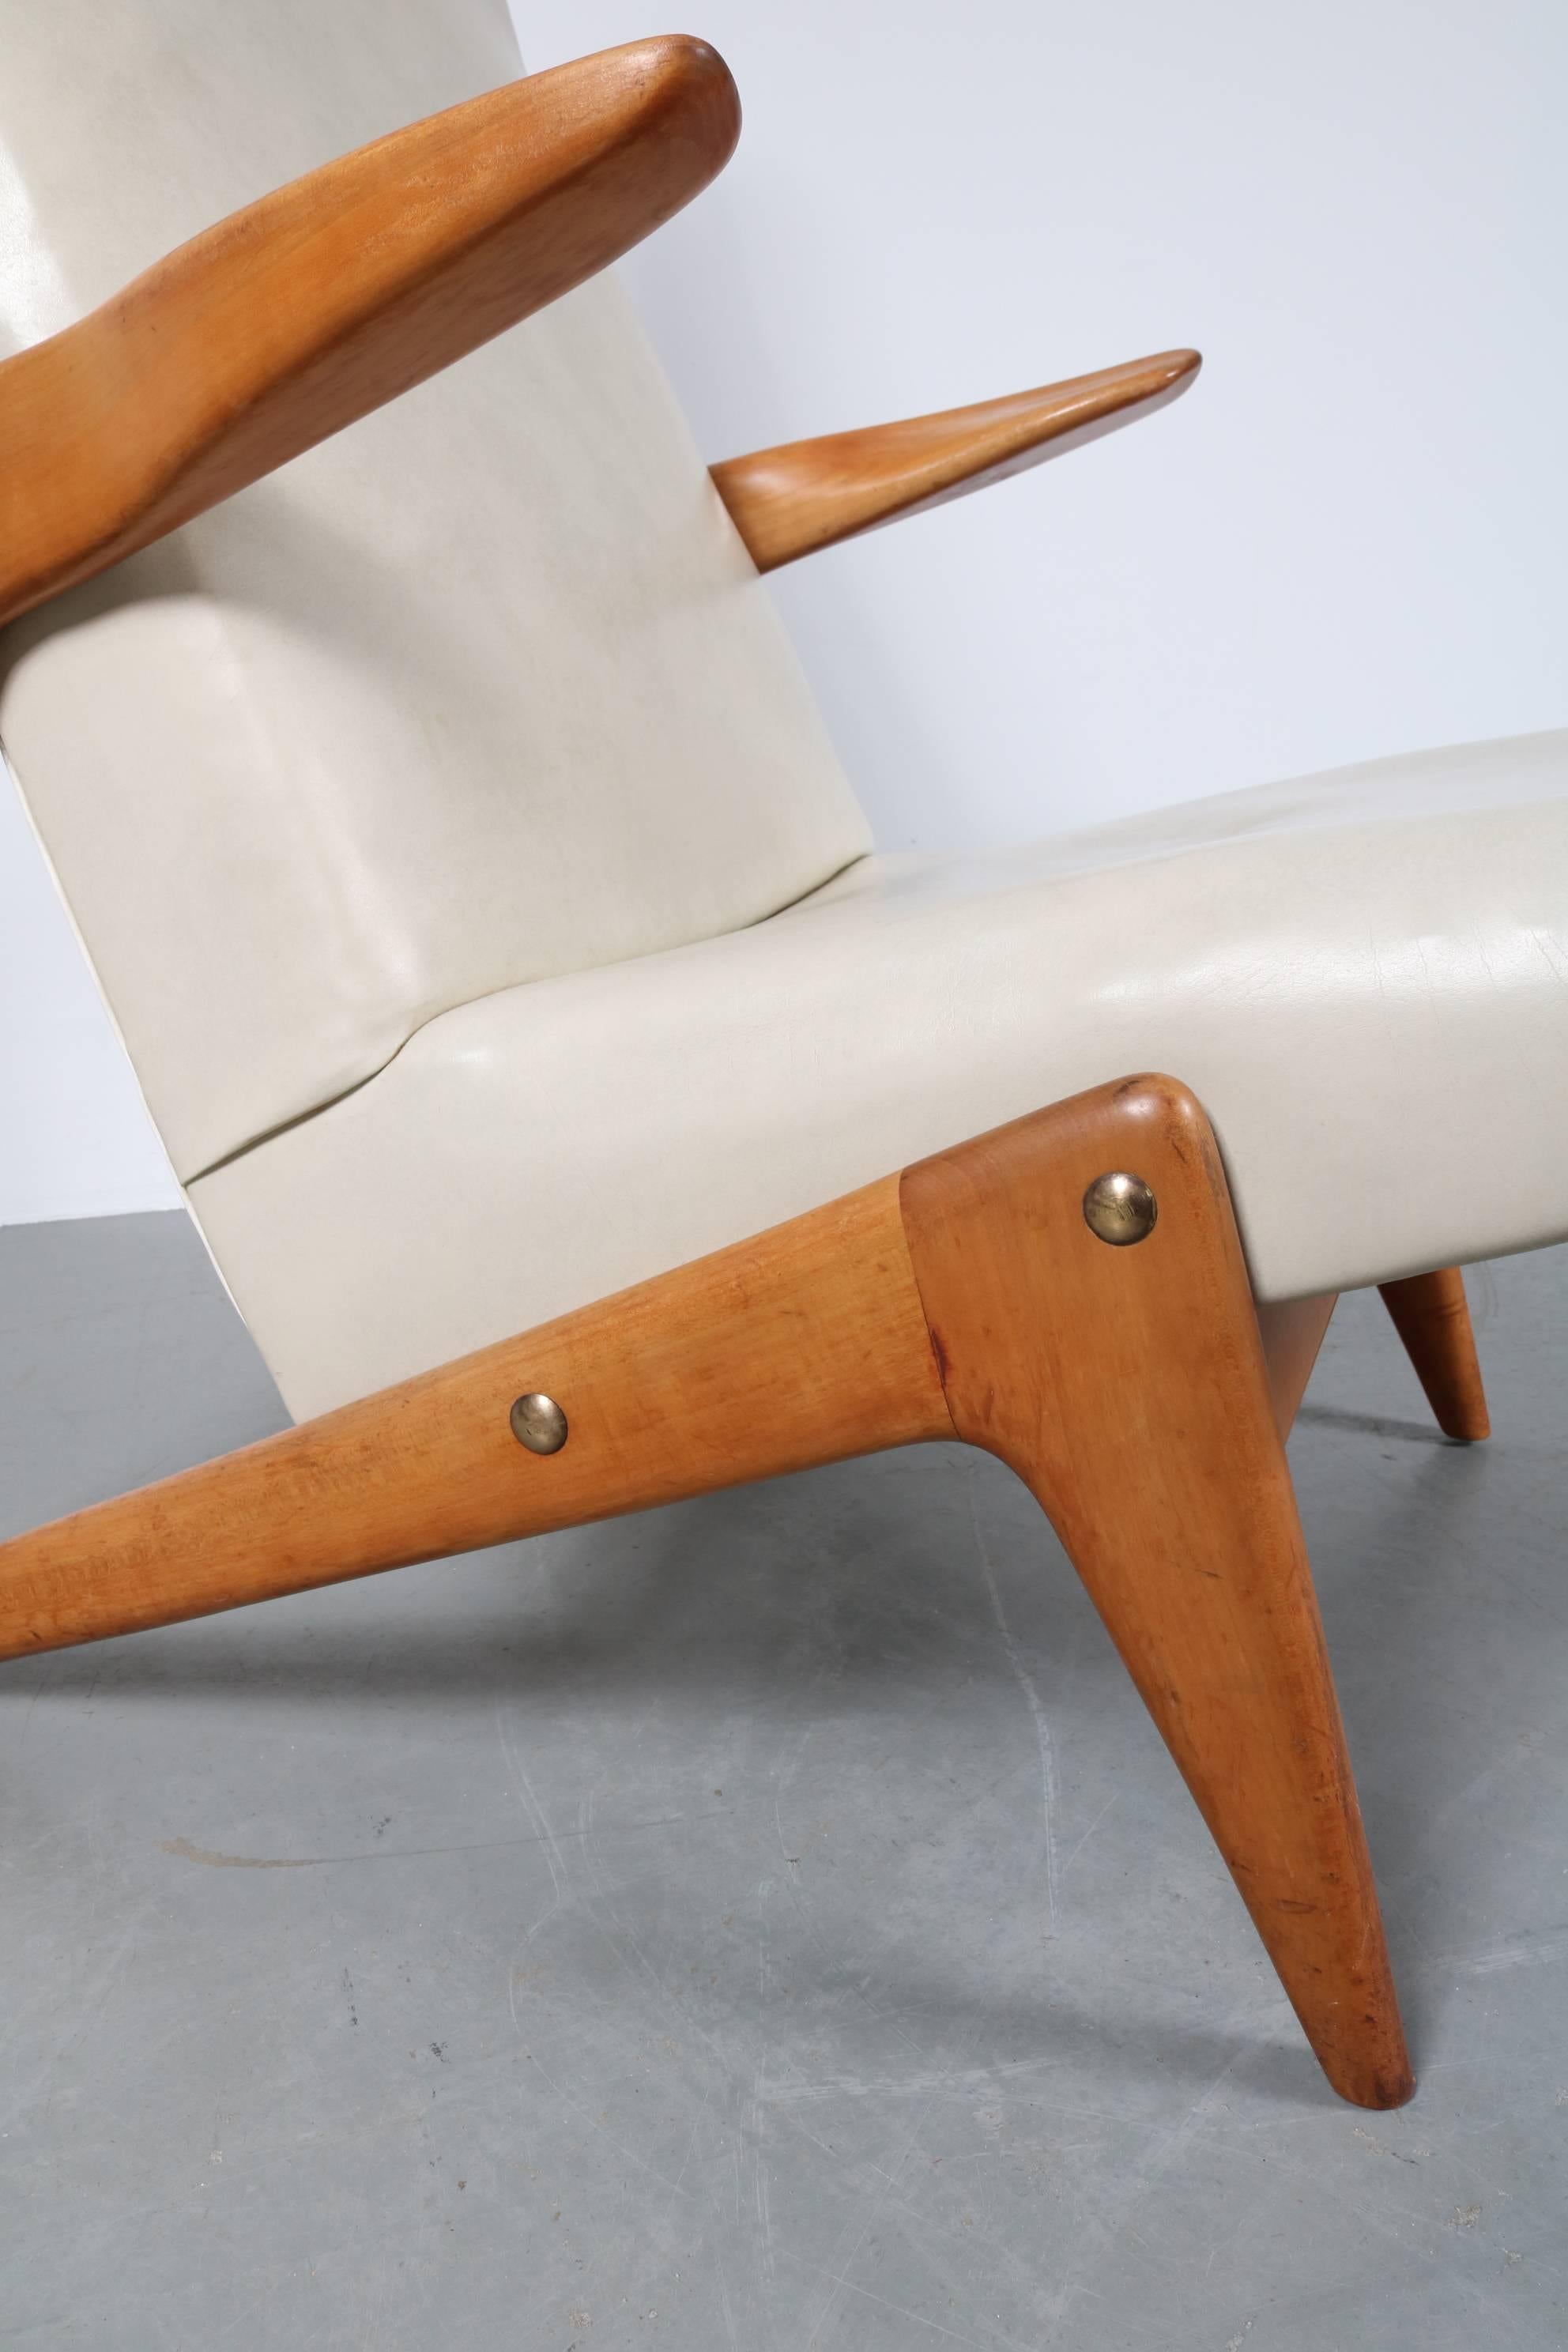 Belgian Lounge Chair Attributed to Alfred Hendrickx for Belform, Belgium, 1950s